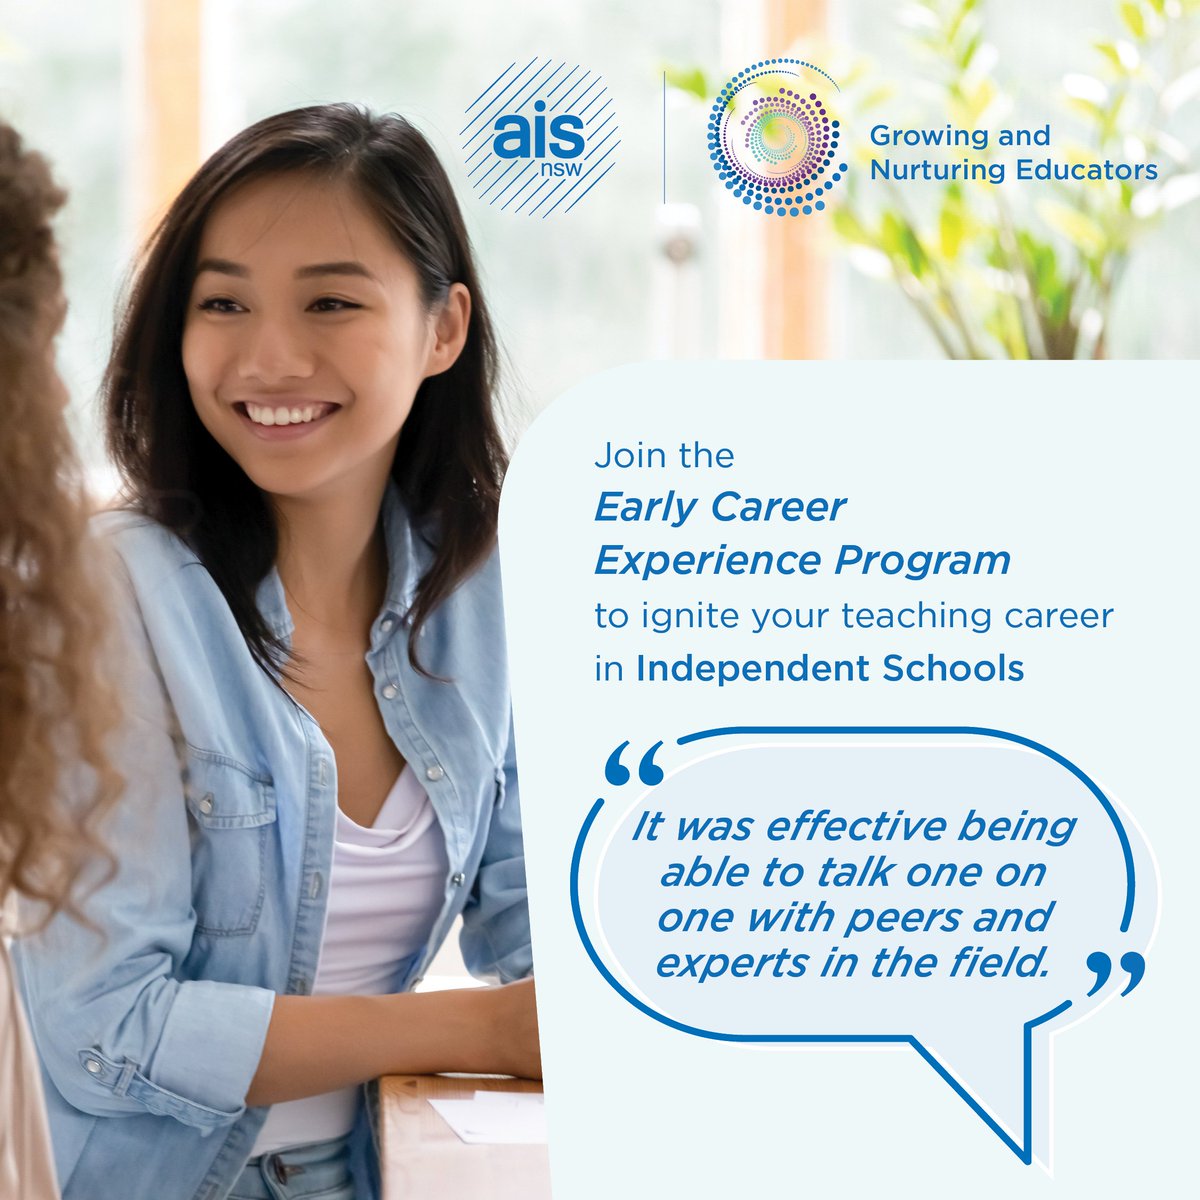 *Applications closing soon*

Join us for this bespoke course from AISNSW, which includes various supports for new educators. 

#education #GrowingNurturingEducators #Independenteducation

ow.ly/crr550Qi8AL